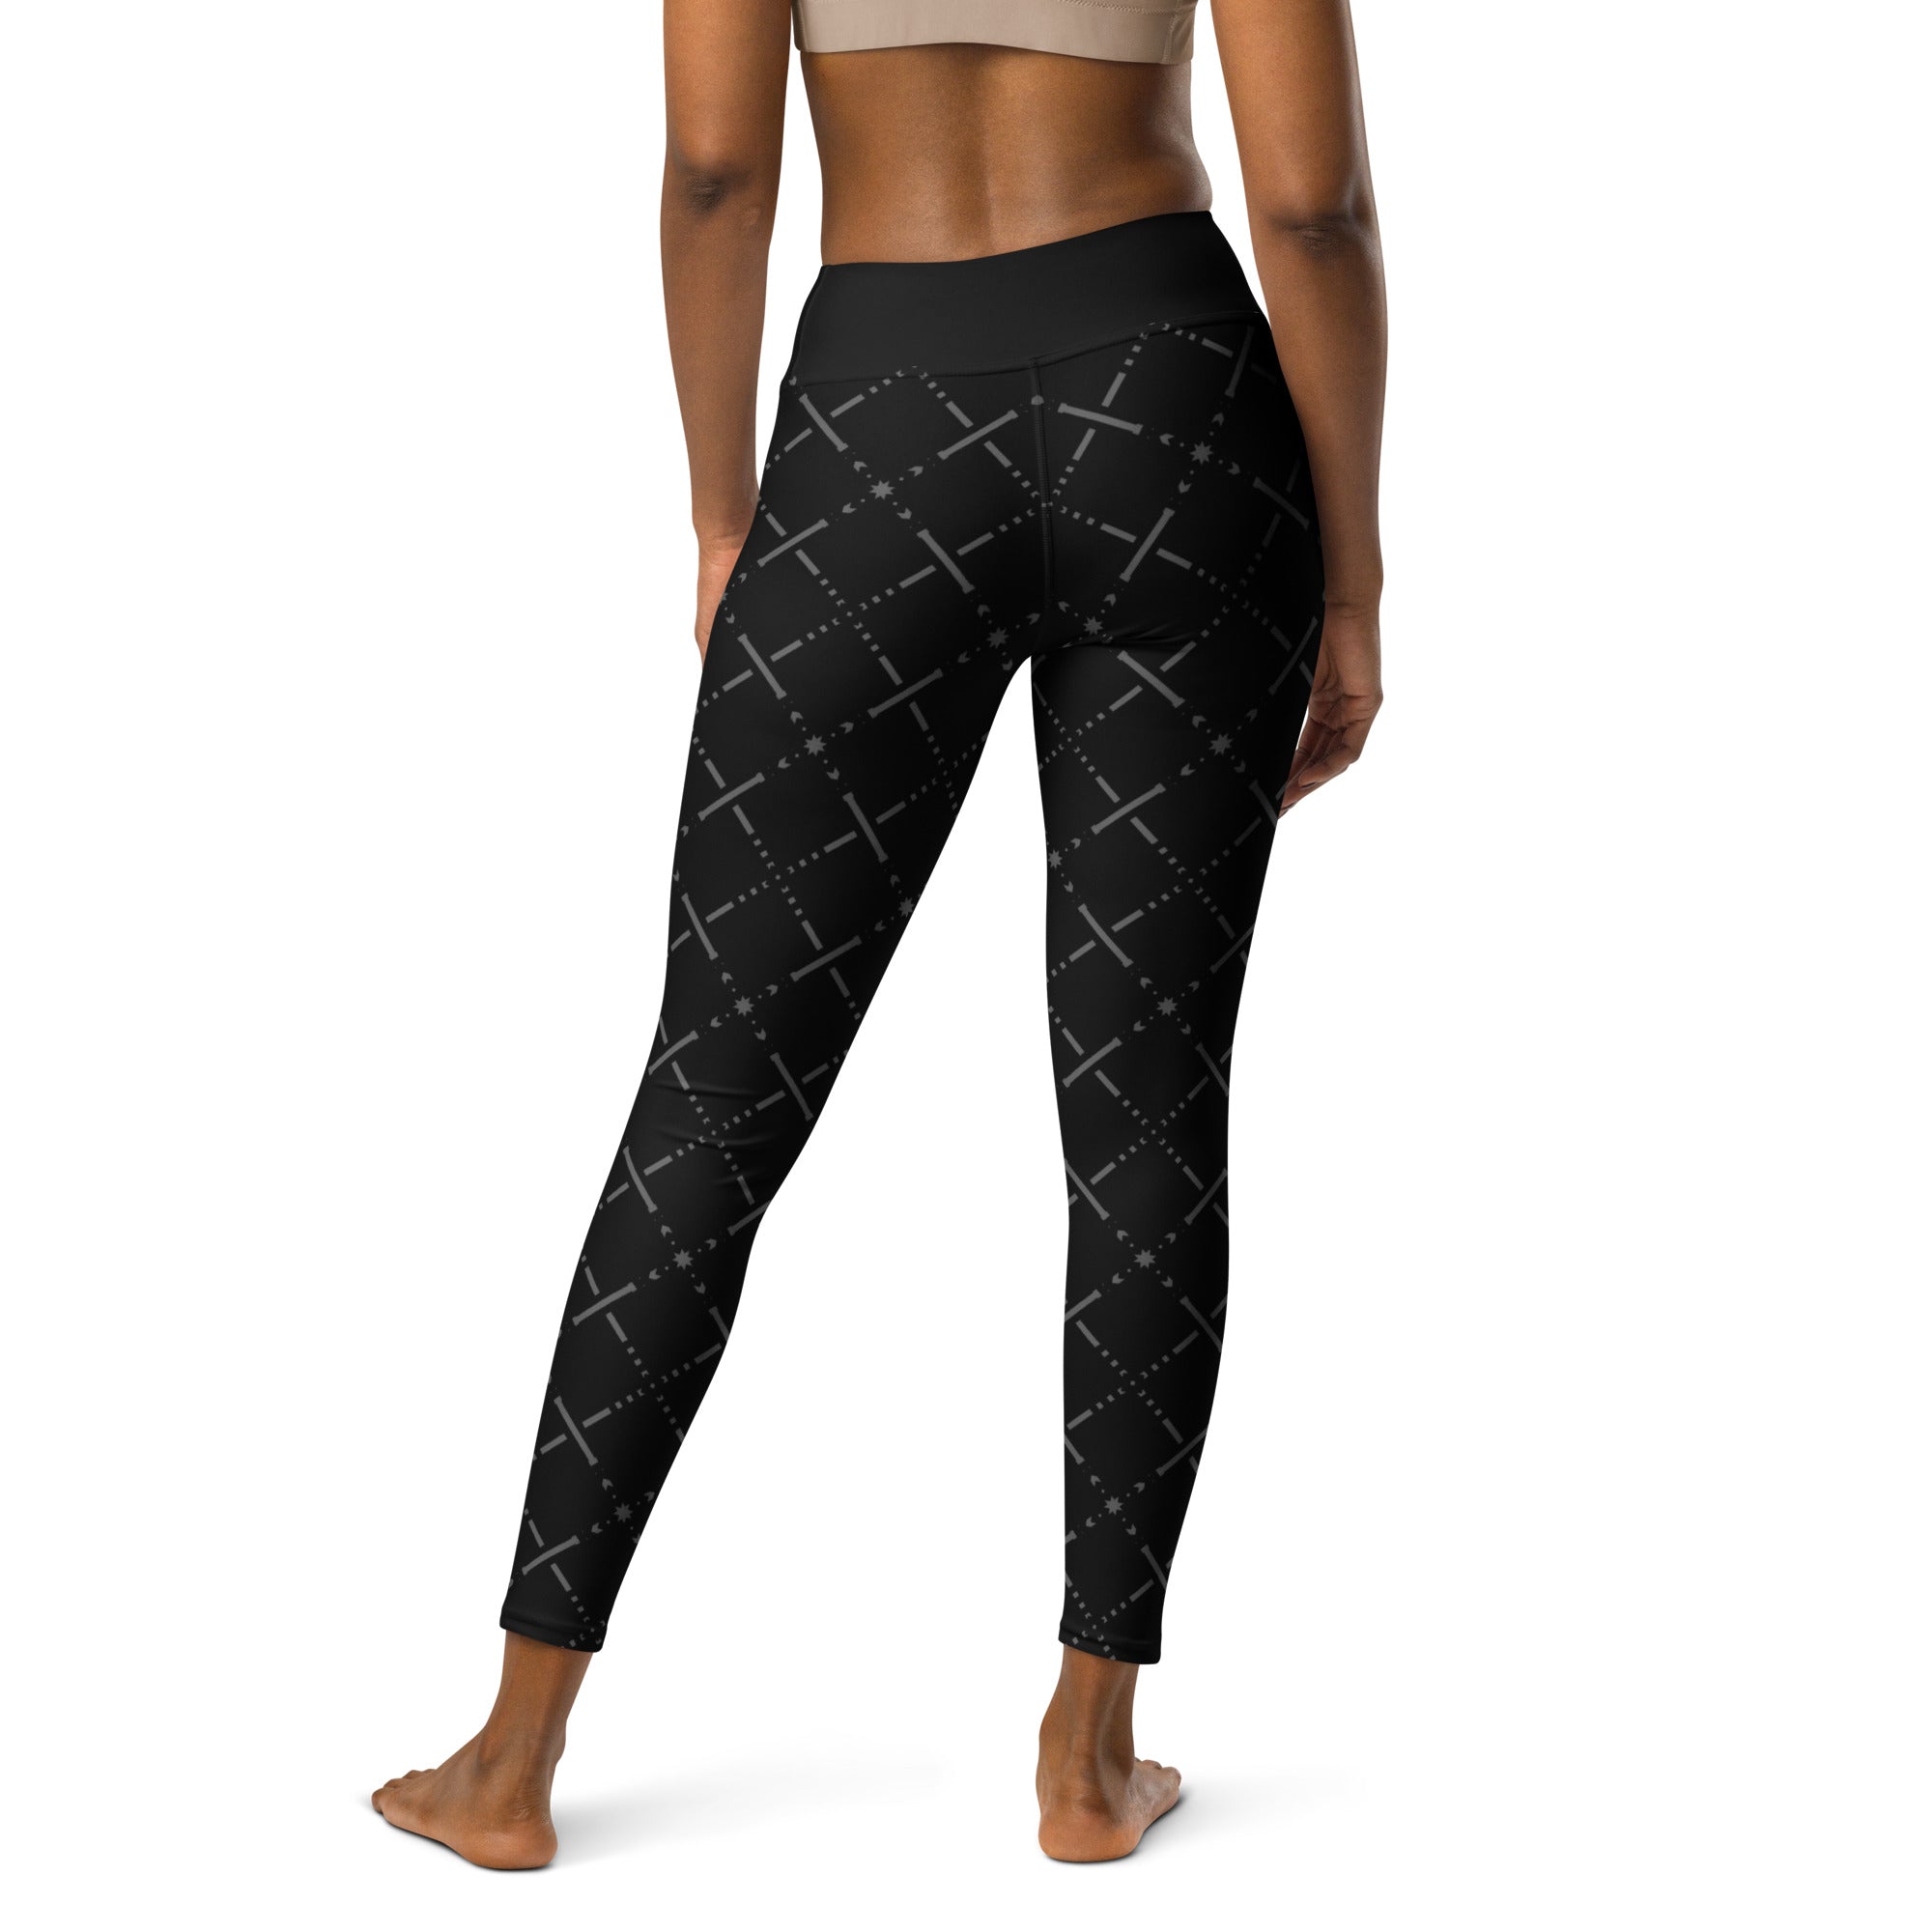 Comfortable Retro Revival Yoga Leggings for fitness and casual wear.